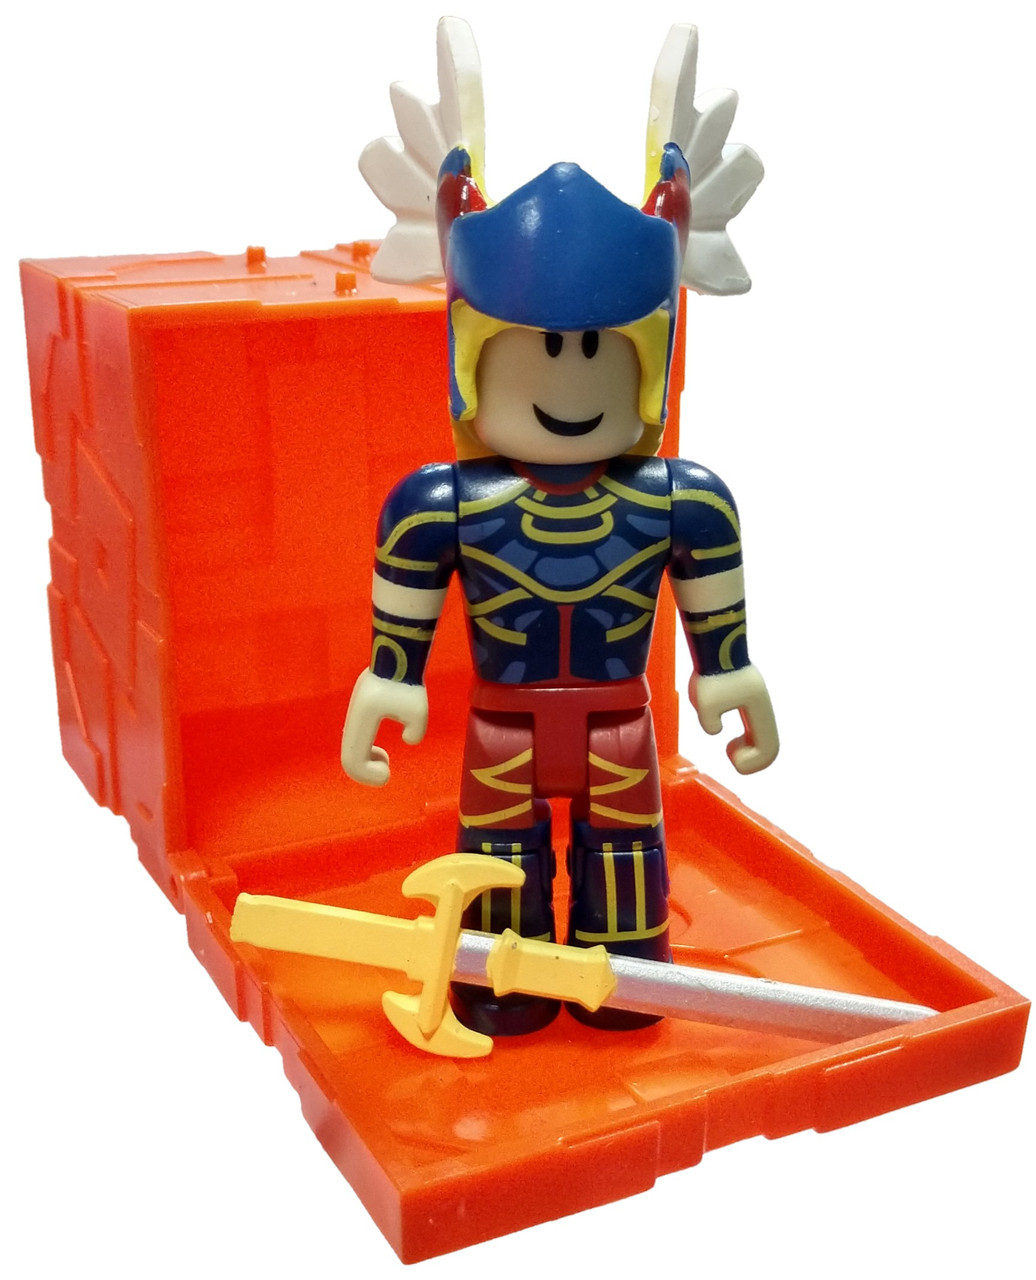 Roblox Series 6 Summoner Tycoon Valkyrie 3 Mini Figure With Orange Cube And Online Code Loose Jazwares Toywiz - roblox summoner tycoon figure playset